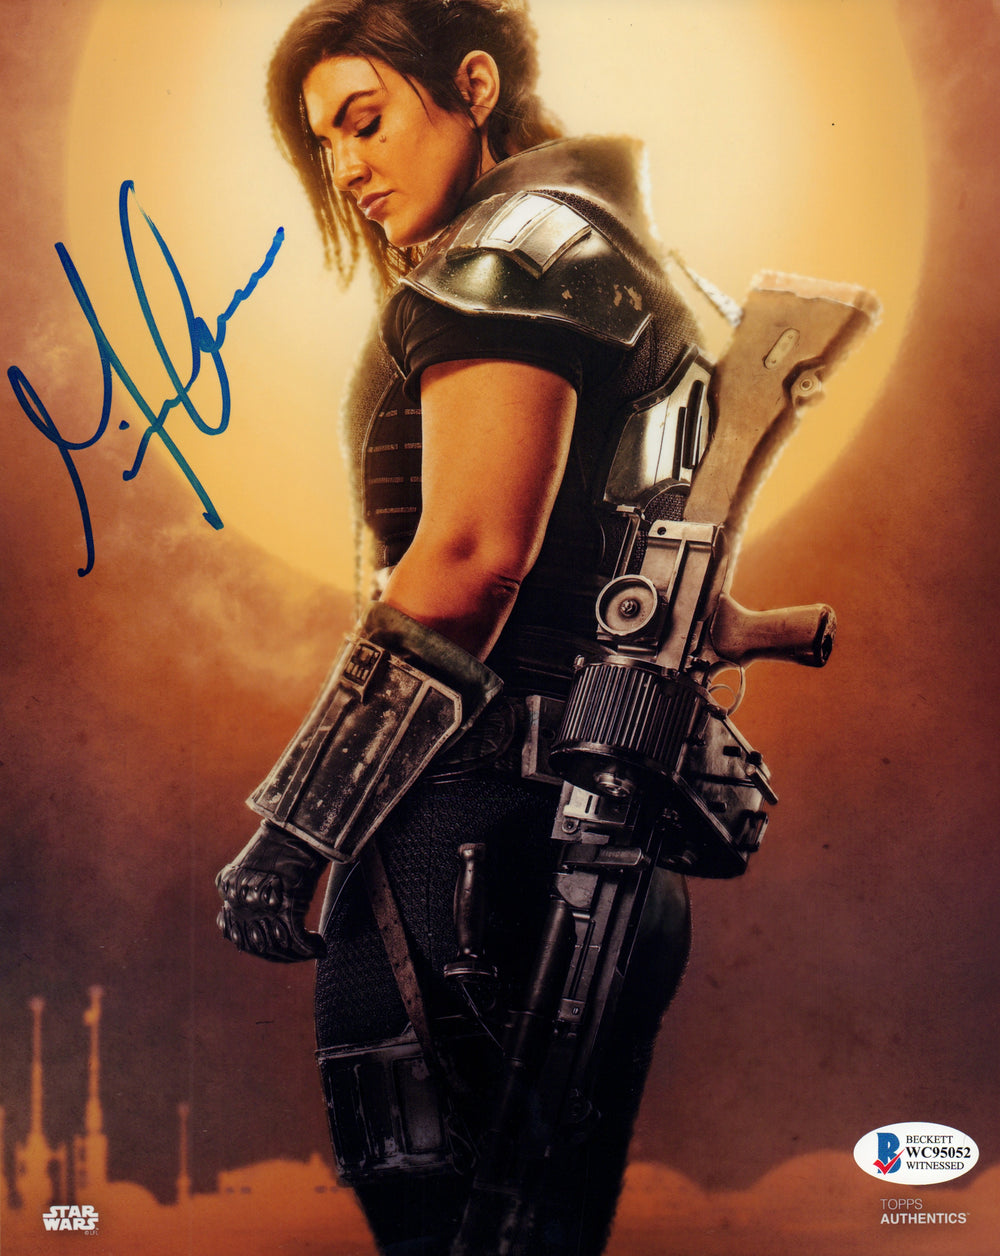 Gina Carano as Cara Dune in Star Wars The Mandalorian (BAS Beckett Witnessed) Signed 8x10 Photo